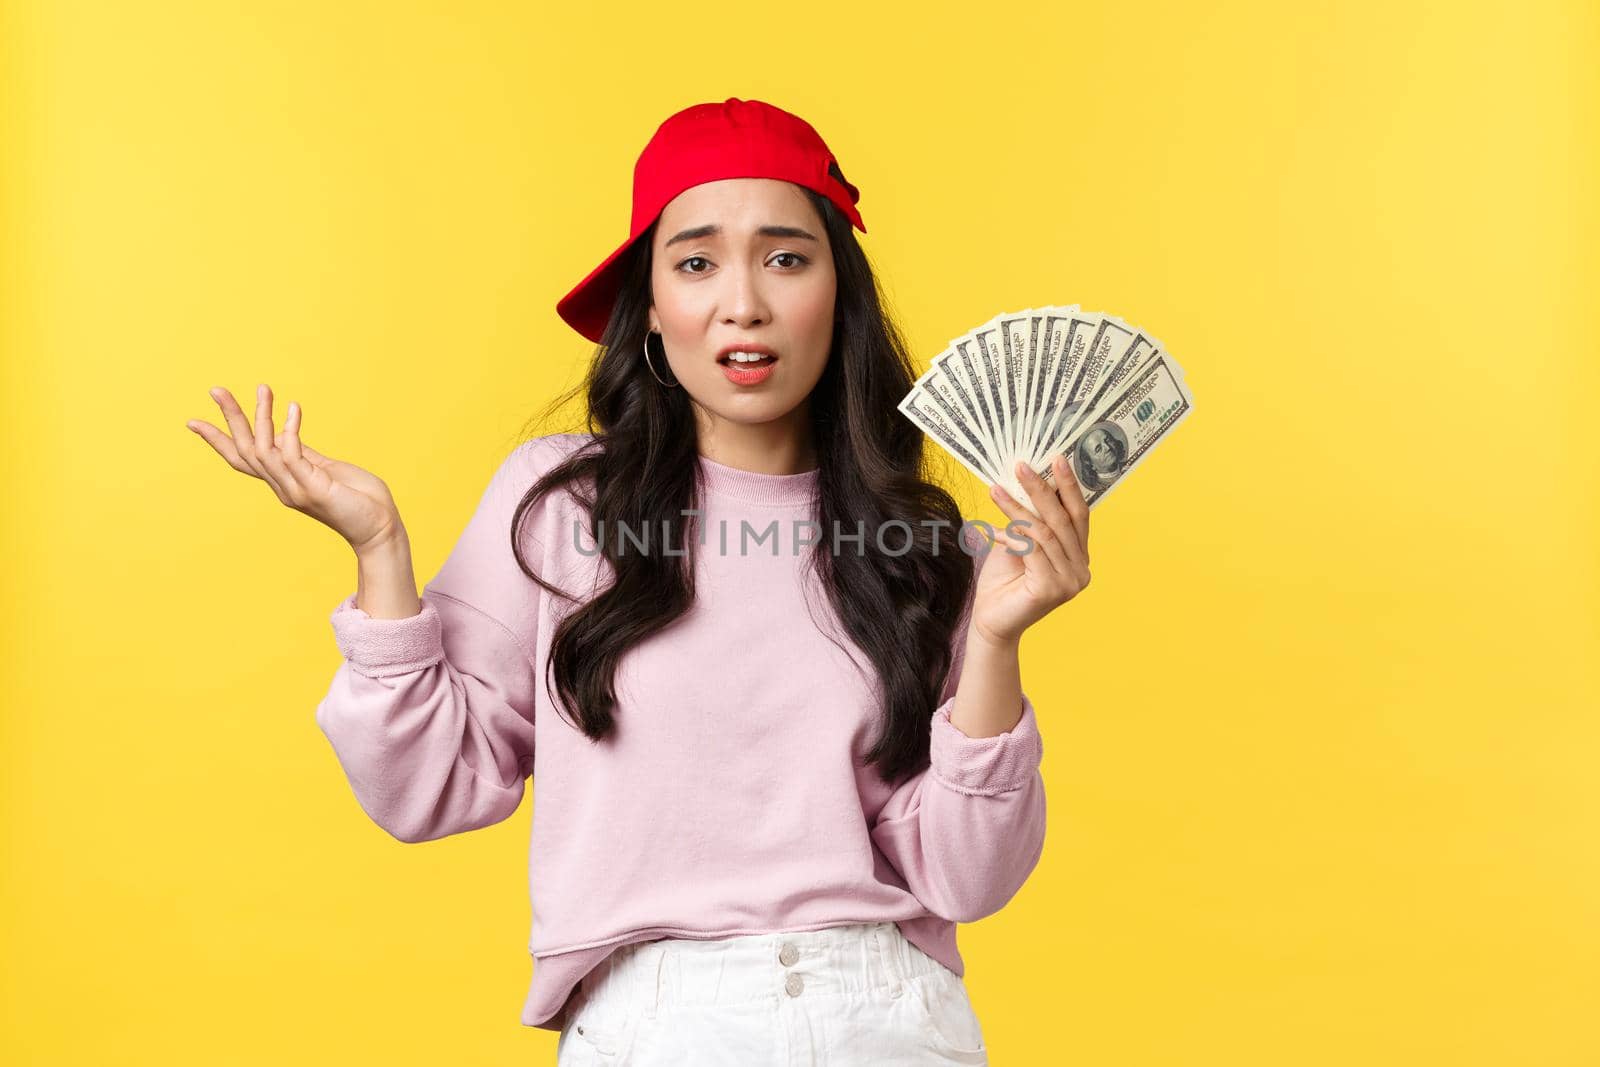 People emotions, lifestyle leisure and beauty concept. Unbothered cool and stylish rich girl in red cap, bragging about her wealth, showing money, careless spend cash, yellow background.